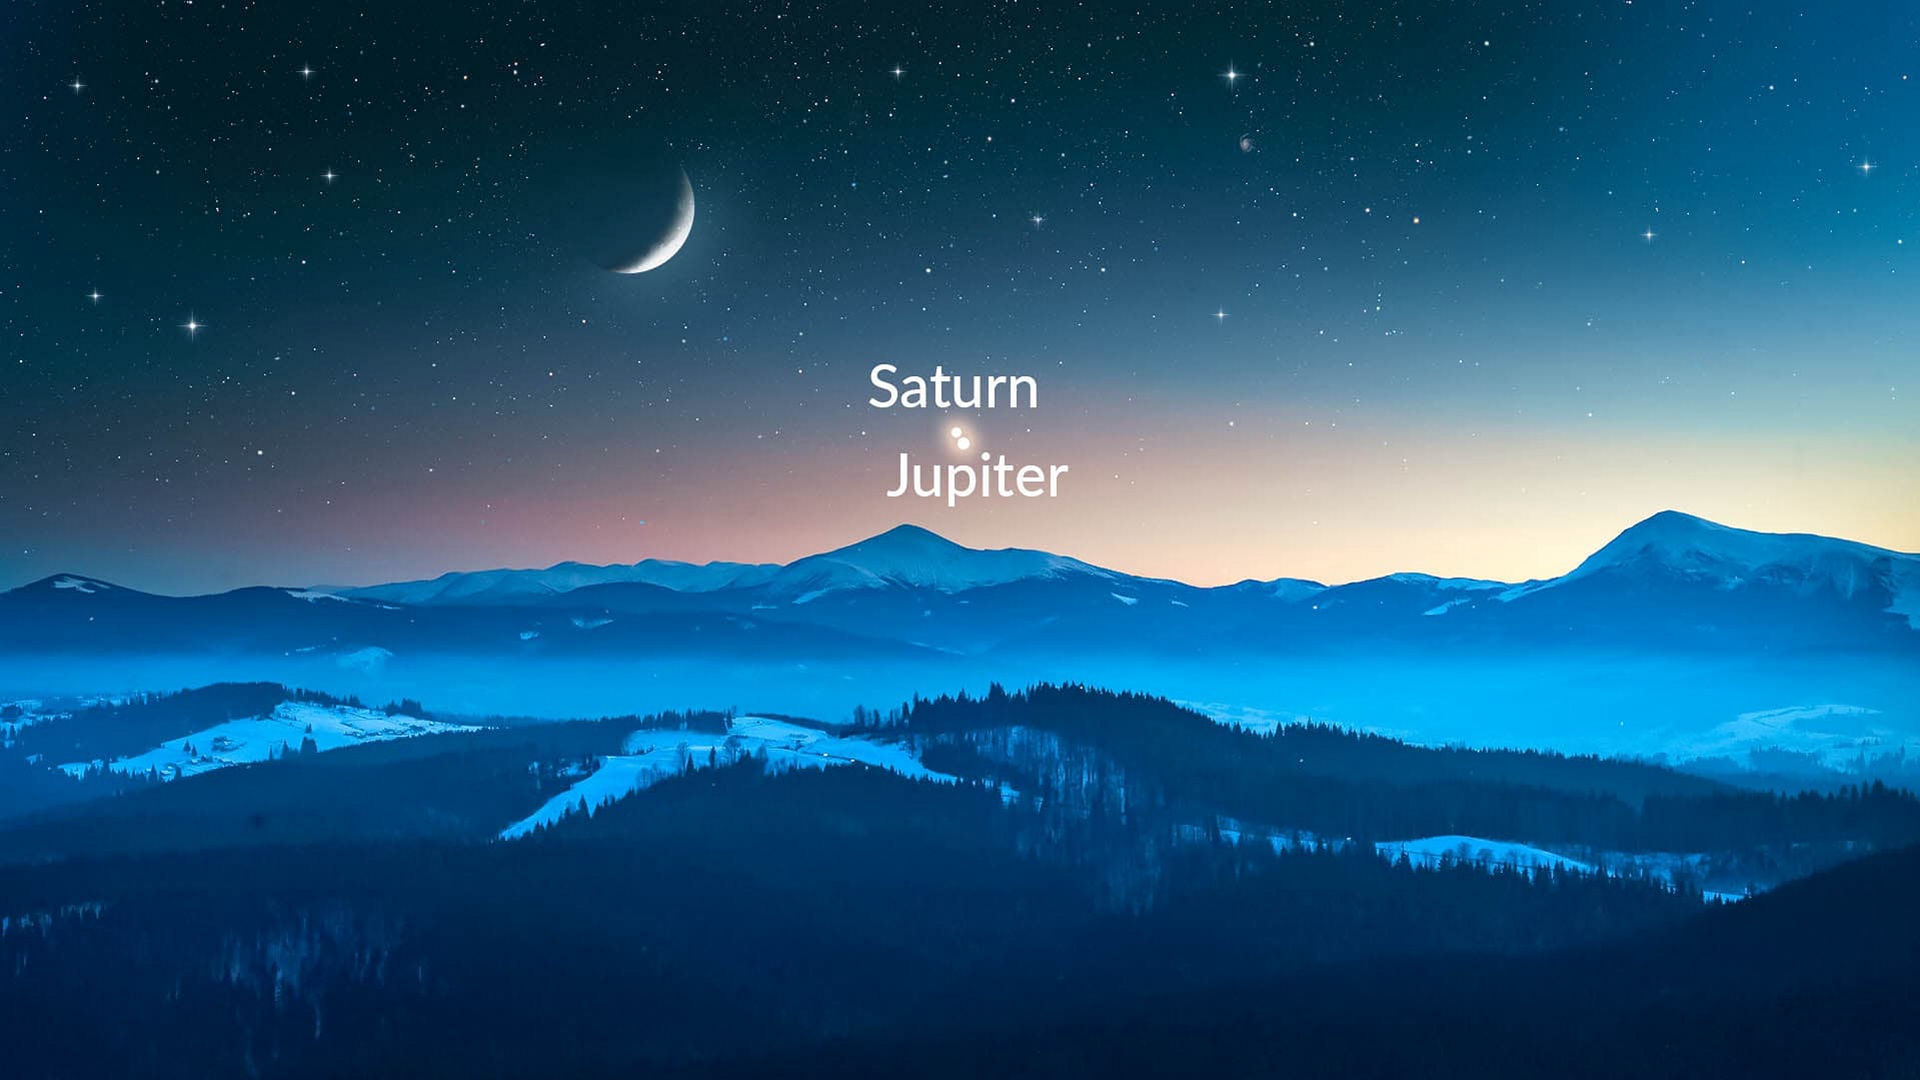 The Great Conjunction: Jupiter and Saturn appear the closest since 1623